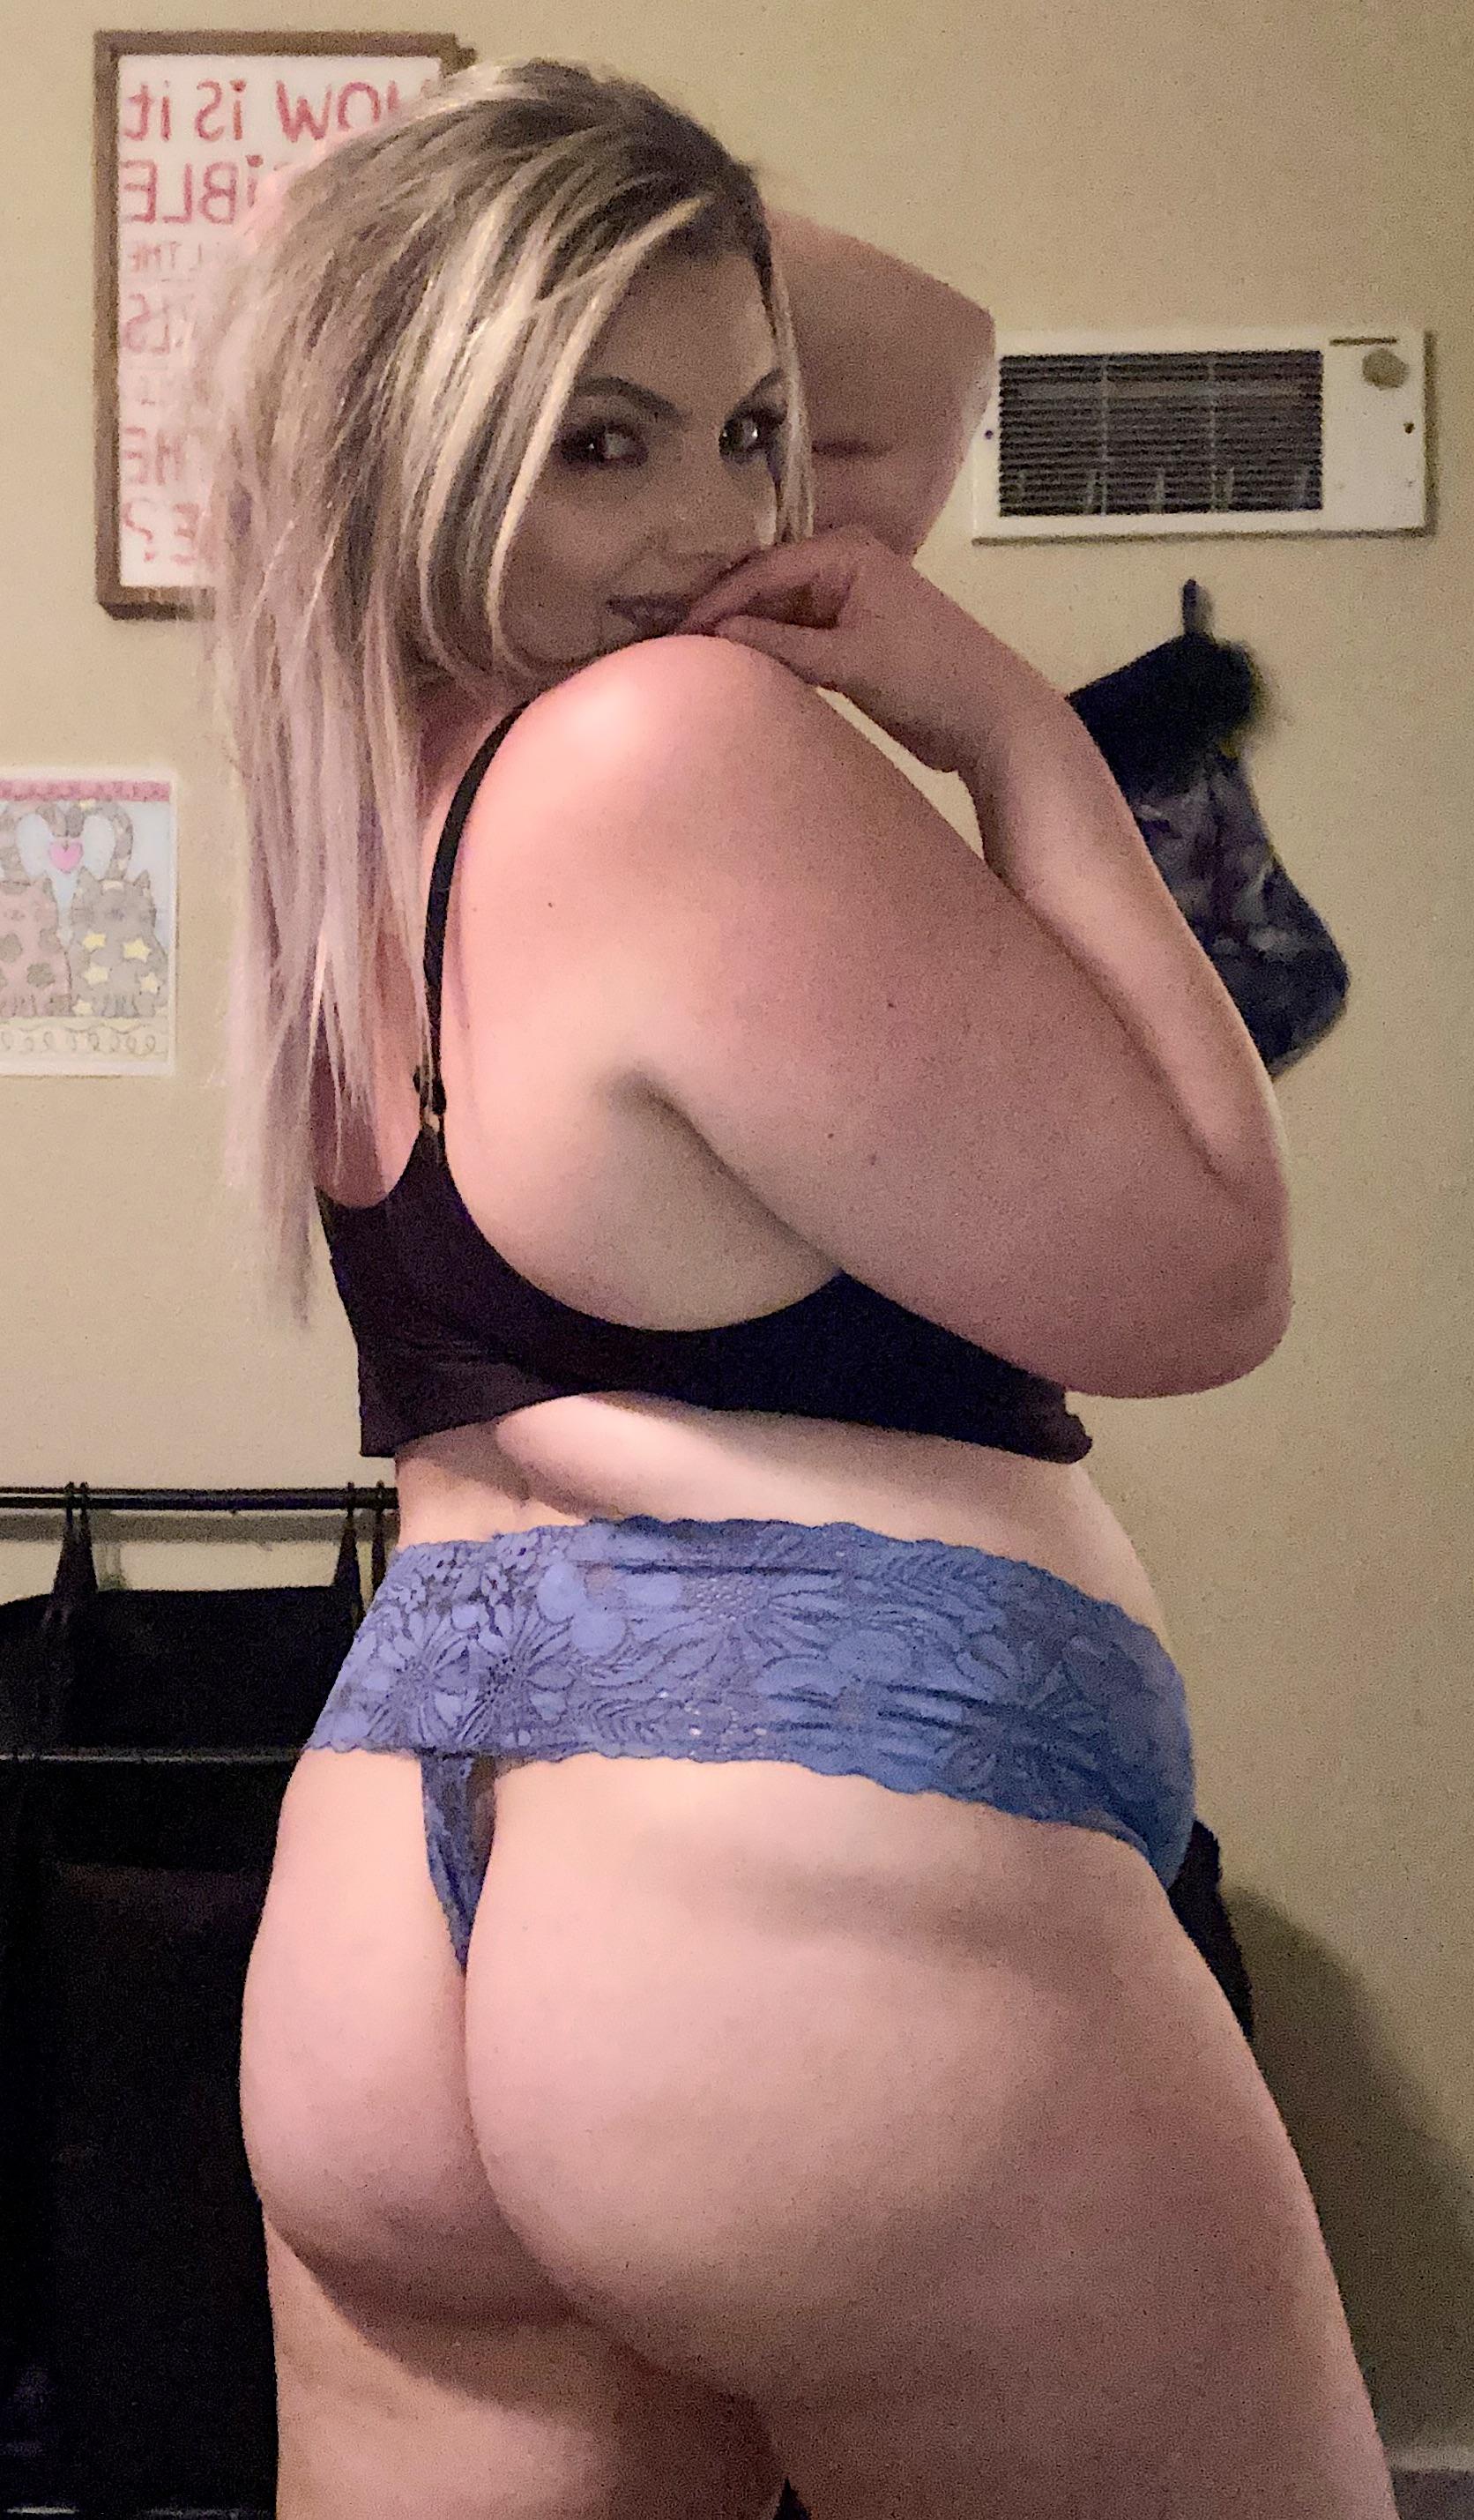 Thicker Happy Friday babes